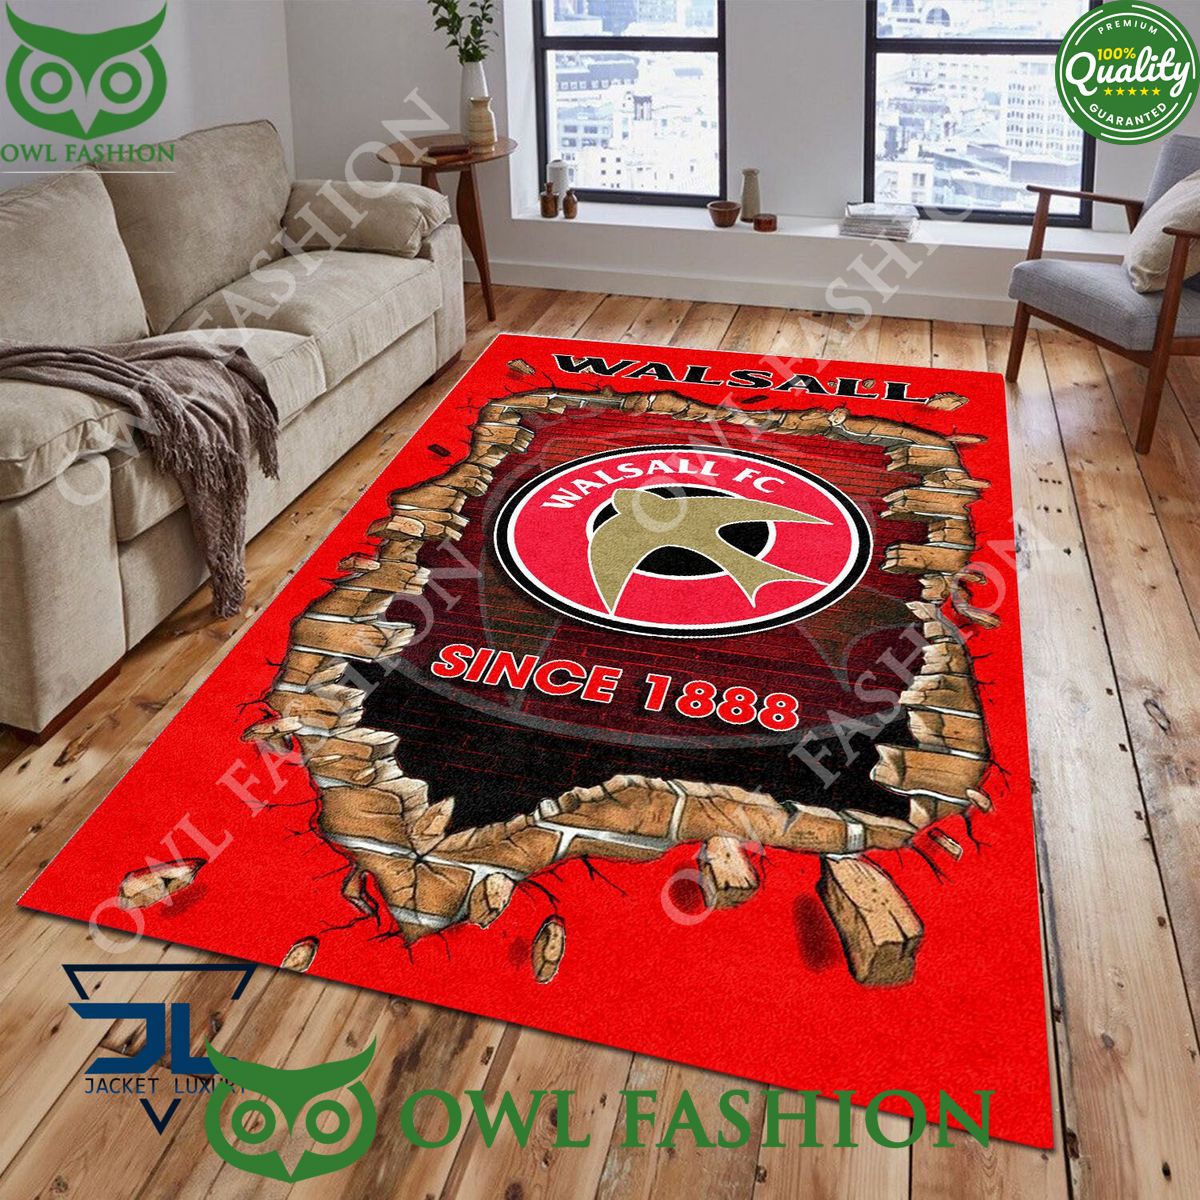 Walsall FC 1864 League Two Living Room Rug Carpet